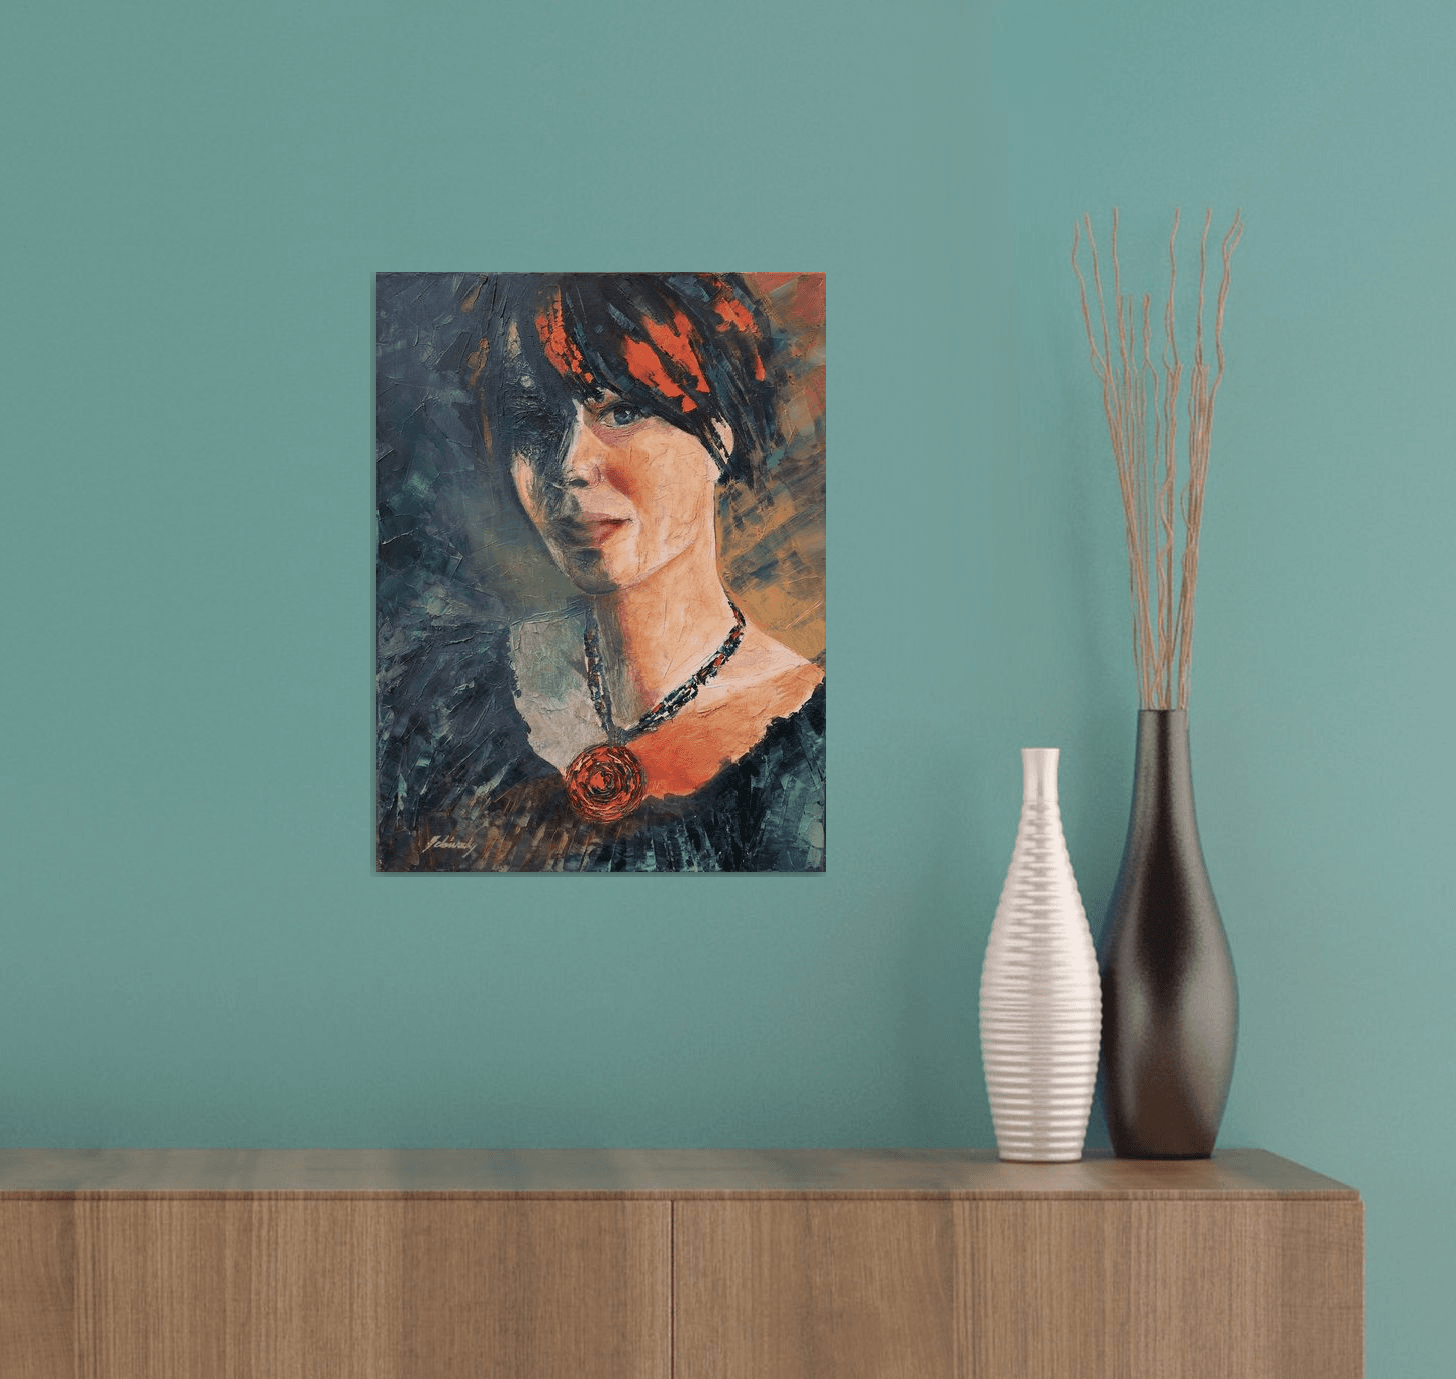 Still in Love with You - 40 x 30 cm, very textured abstract oil portrait painting